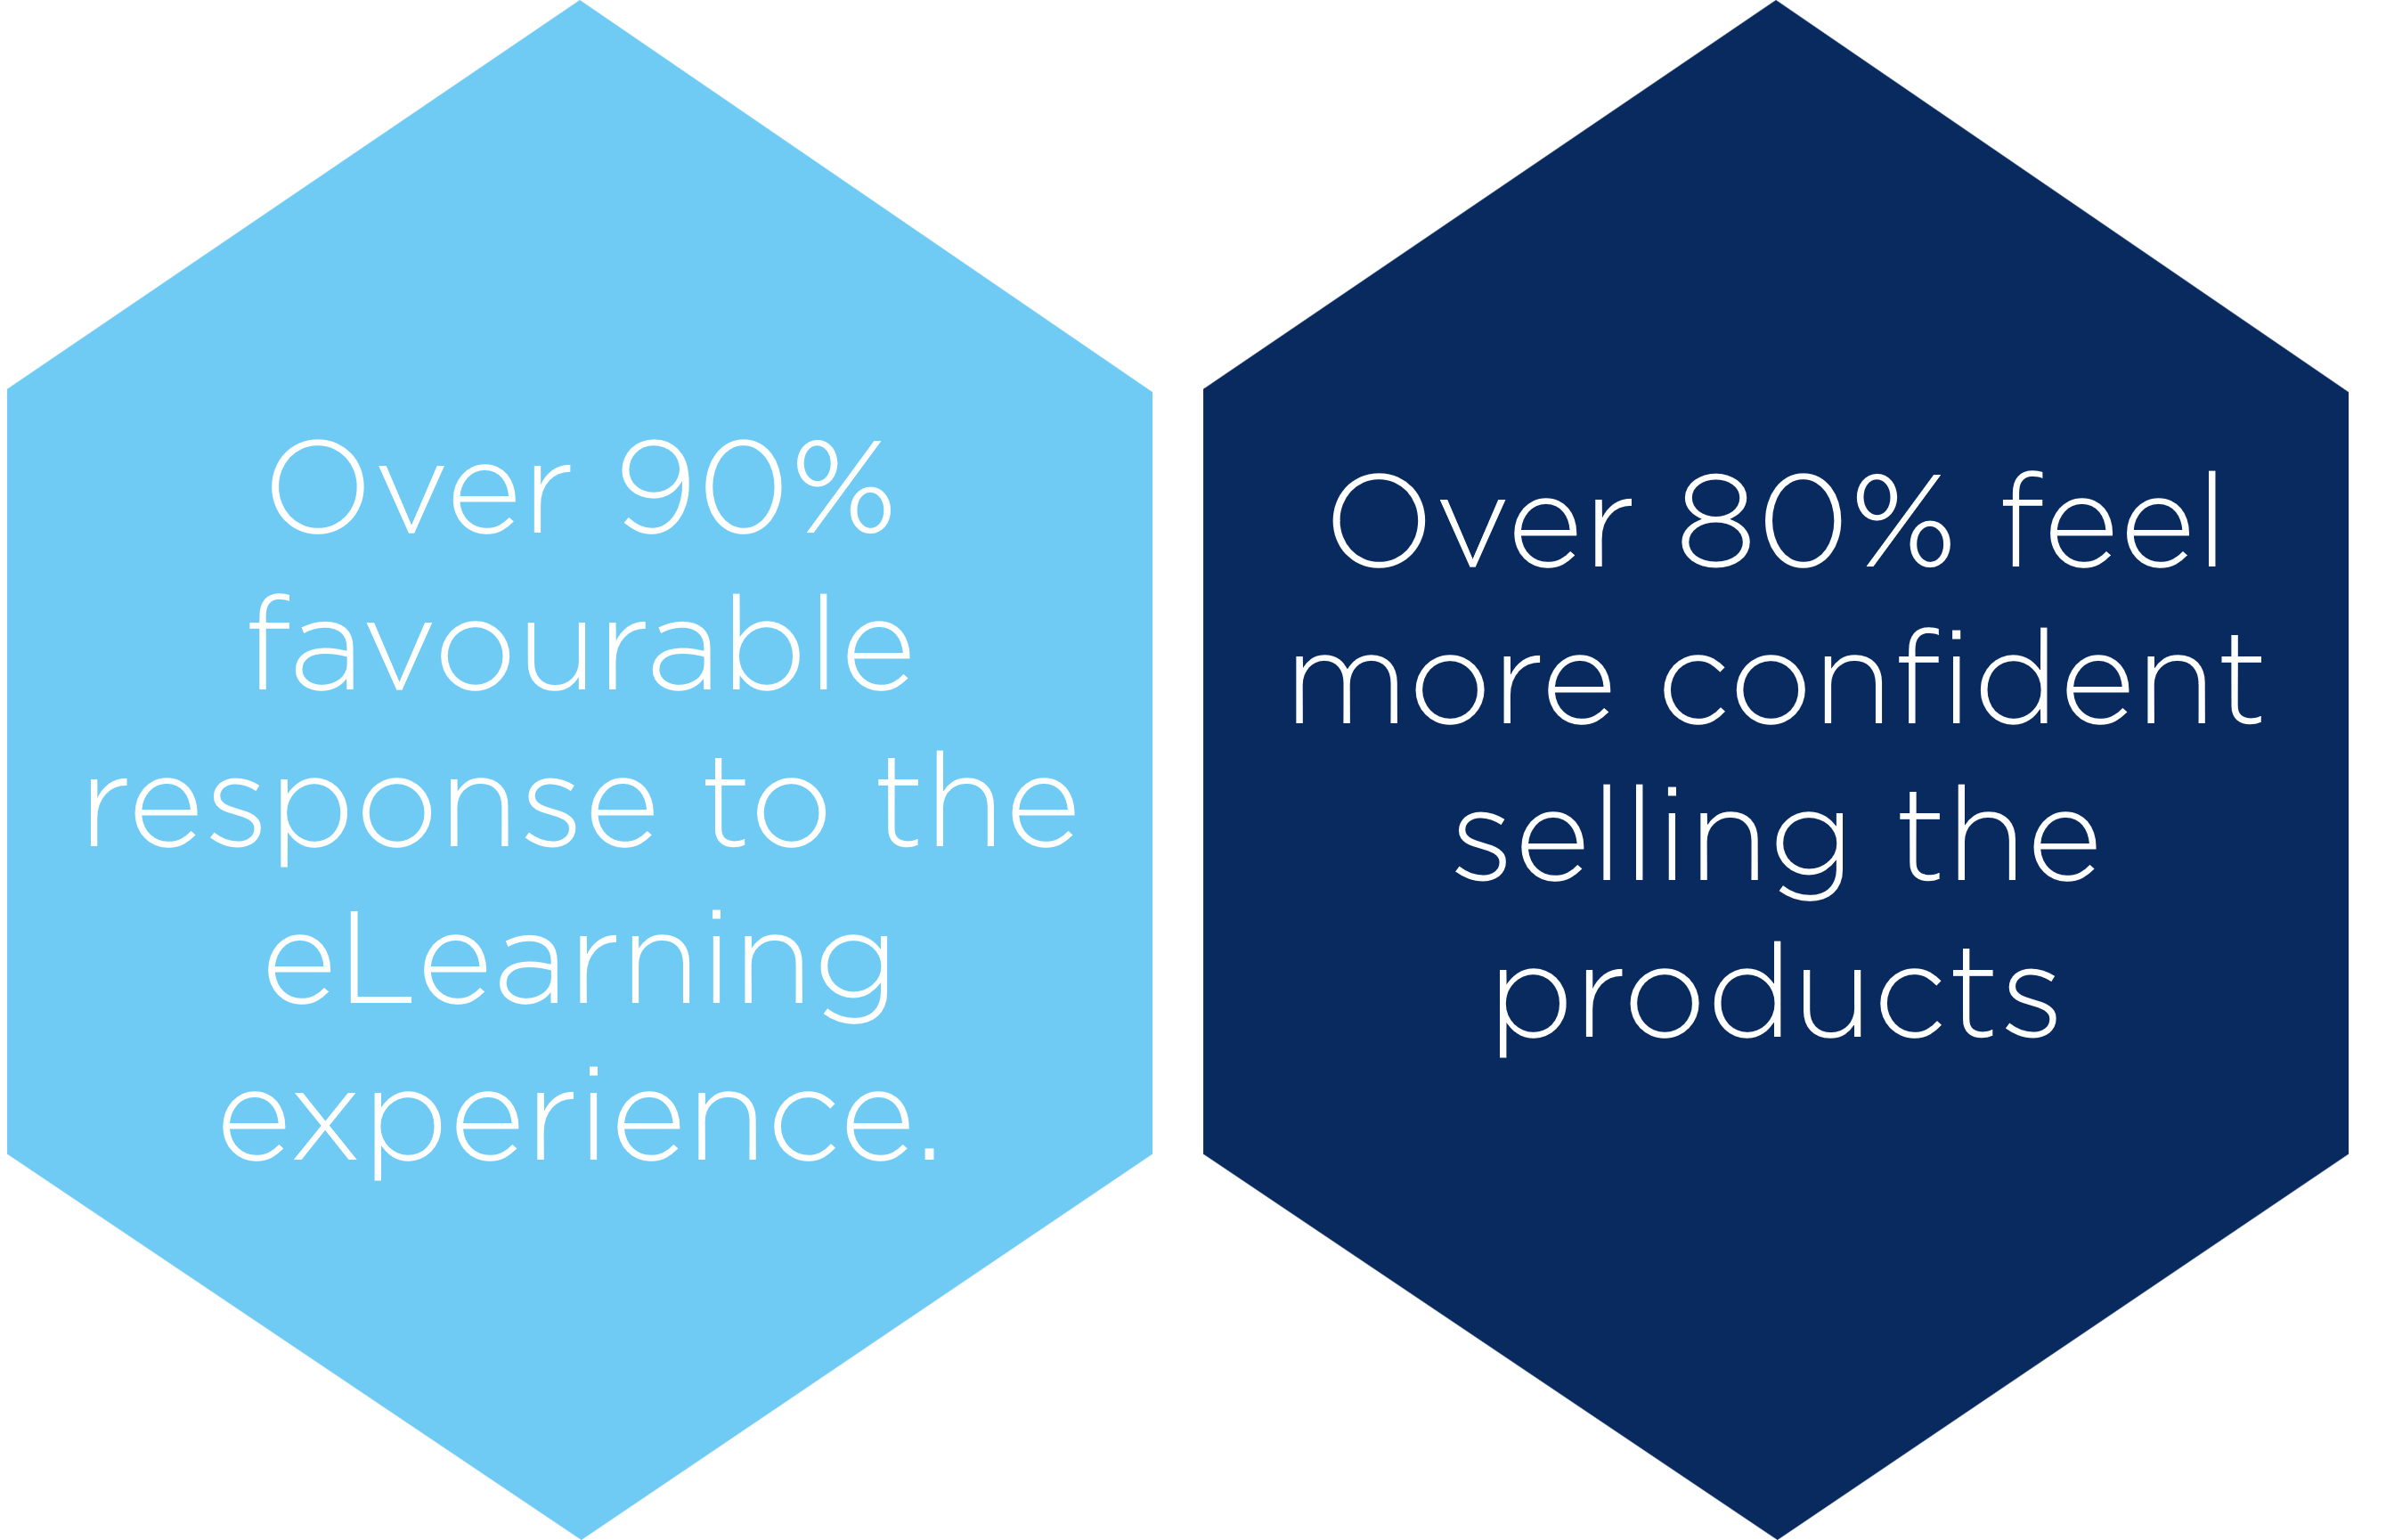 Hexagon 1 text reads "Over 90% favourable response to the eLearning experience". Hexagon 2 text reads "Over 80% feel more confident selling the products".